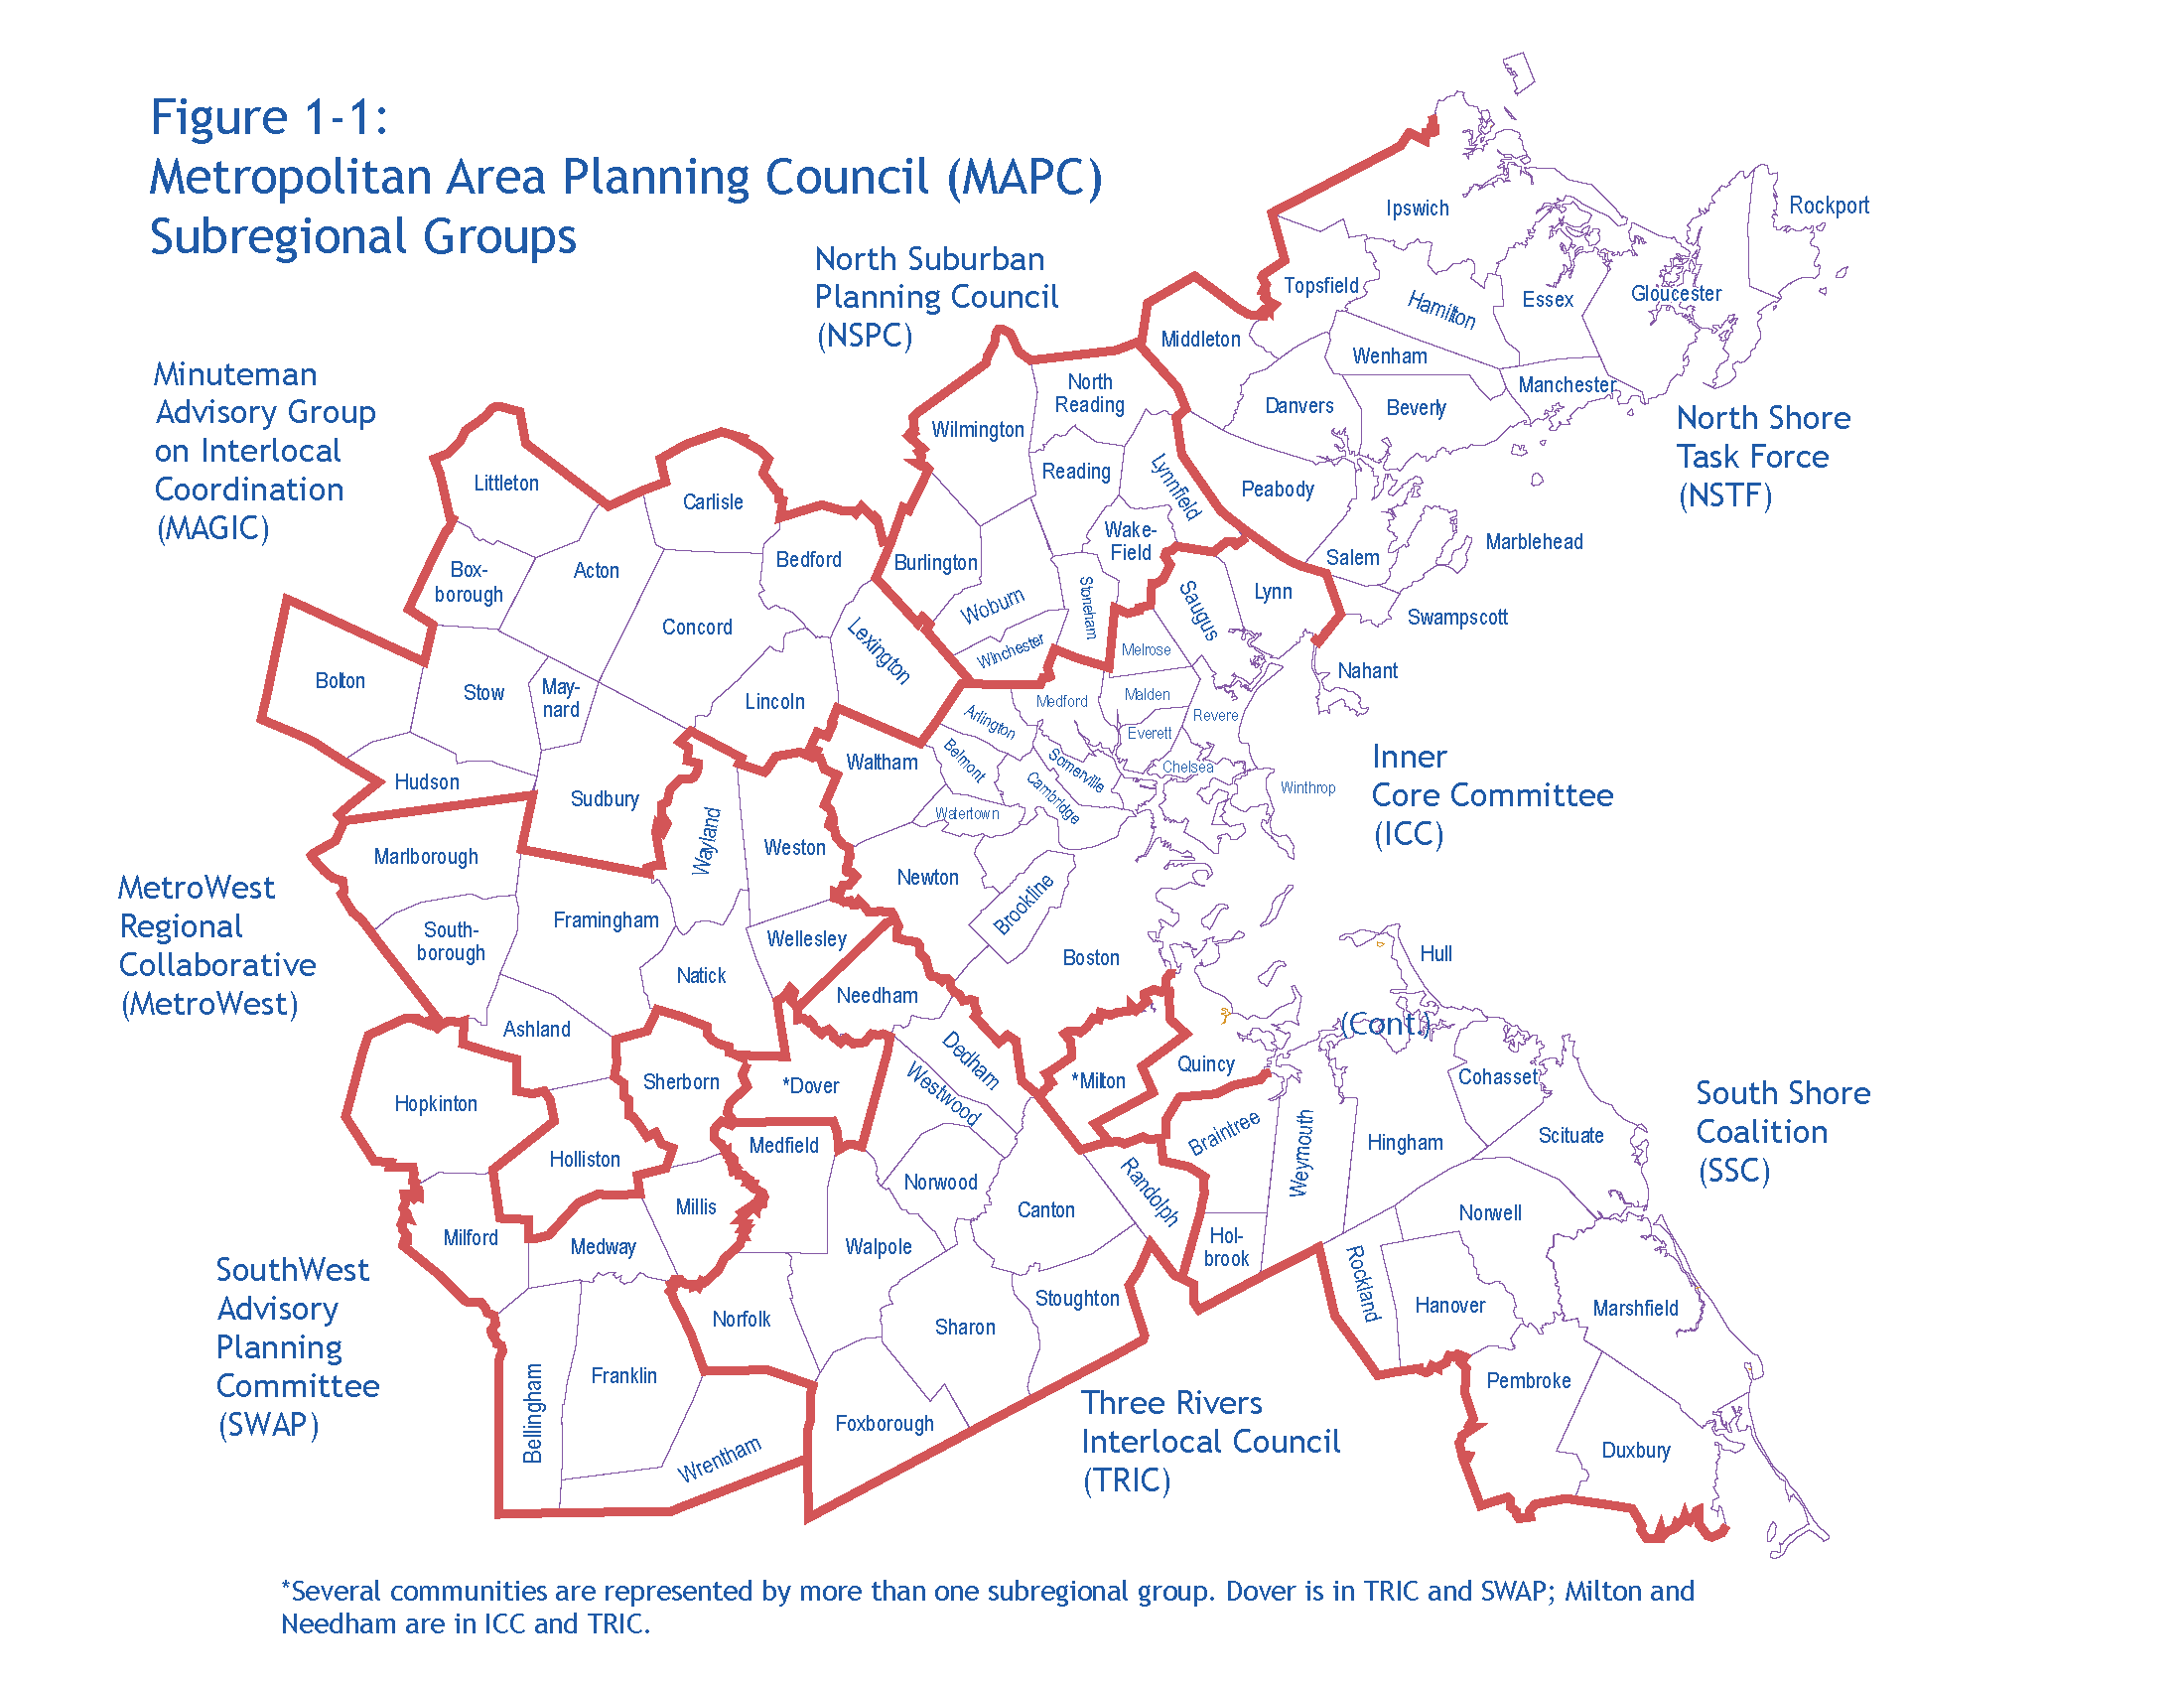 Figure 1-1: Metropolitan Area Planning Council (MAPC) Subregional Groups: This figure shows the boundaries of the MAPC subregional groups within the Boston region. There are eight subregional groups: North Shore Task Force, North Suburban Planning Council, Minuteman Advisory Group on Interlocal Coordination, MetroWest Regional Collaborative, SouthWest Advisory Planning Committee, Three Rivers Interlocal Council, South Shore Coalition, and Inner Core Committee.